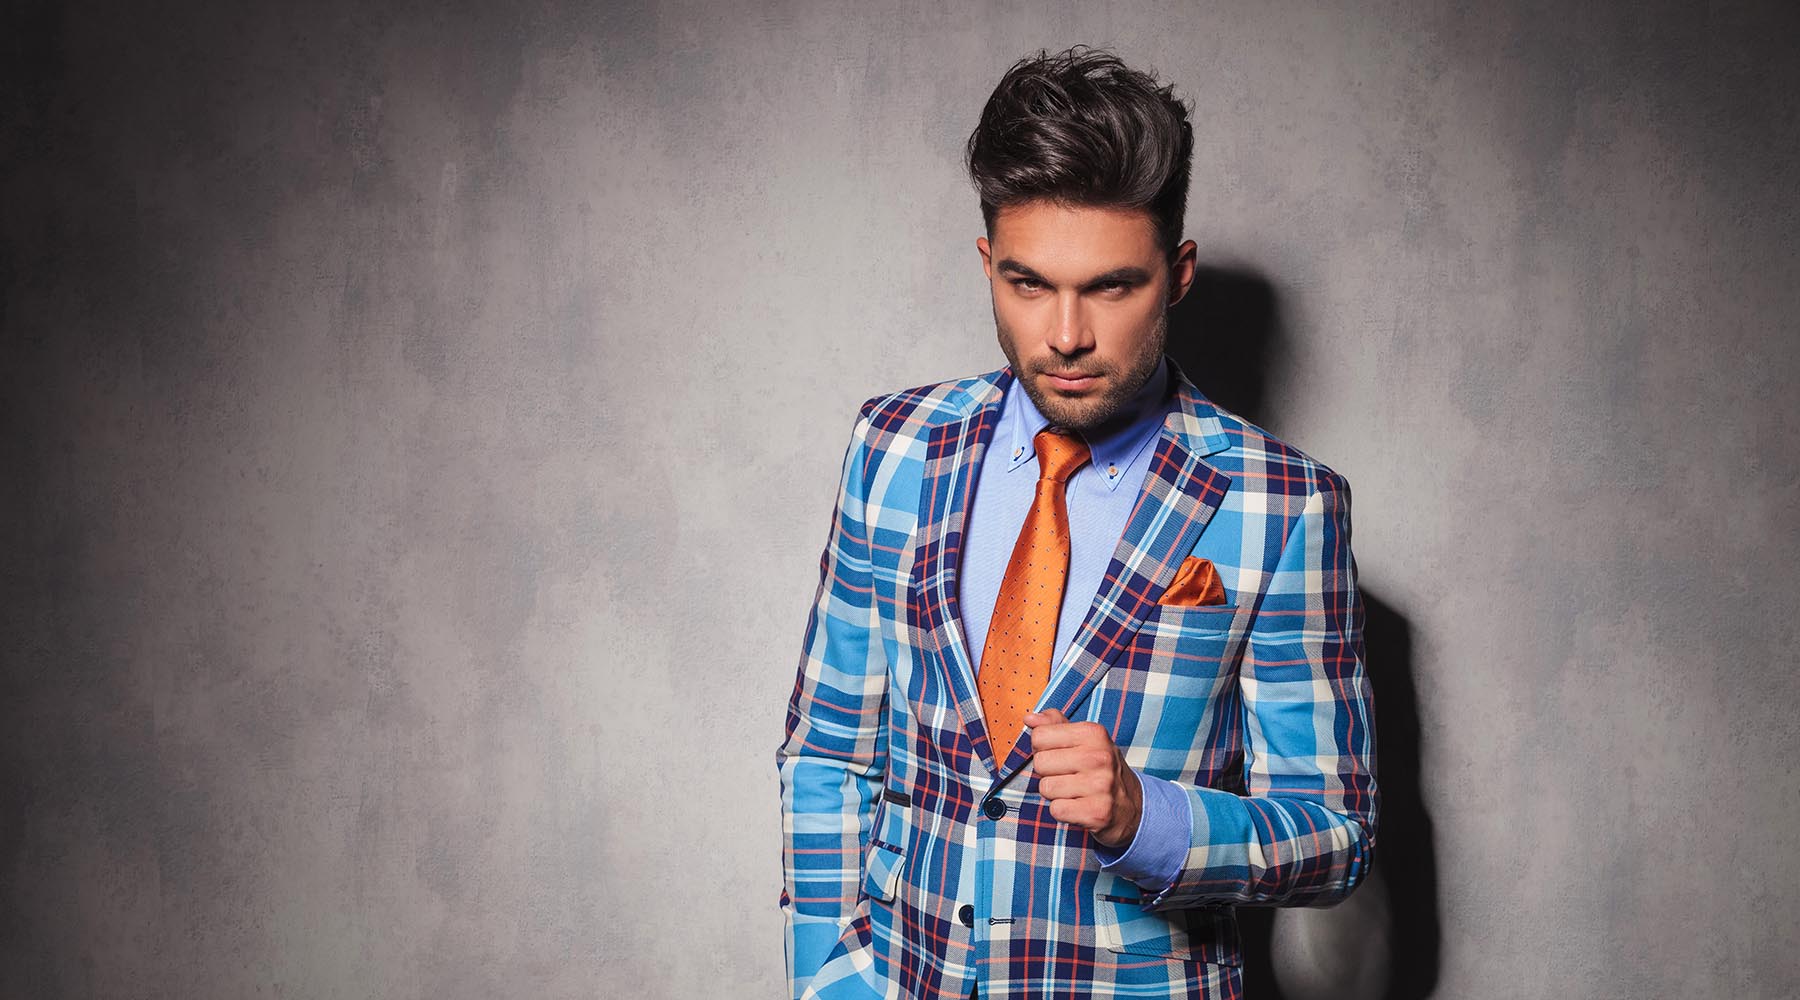 handsome young man wearing orange tie and pocket square with teal white and orange plaid suit